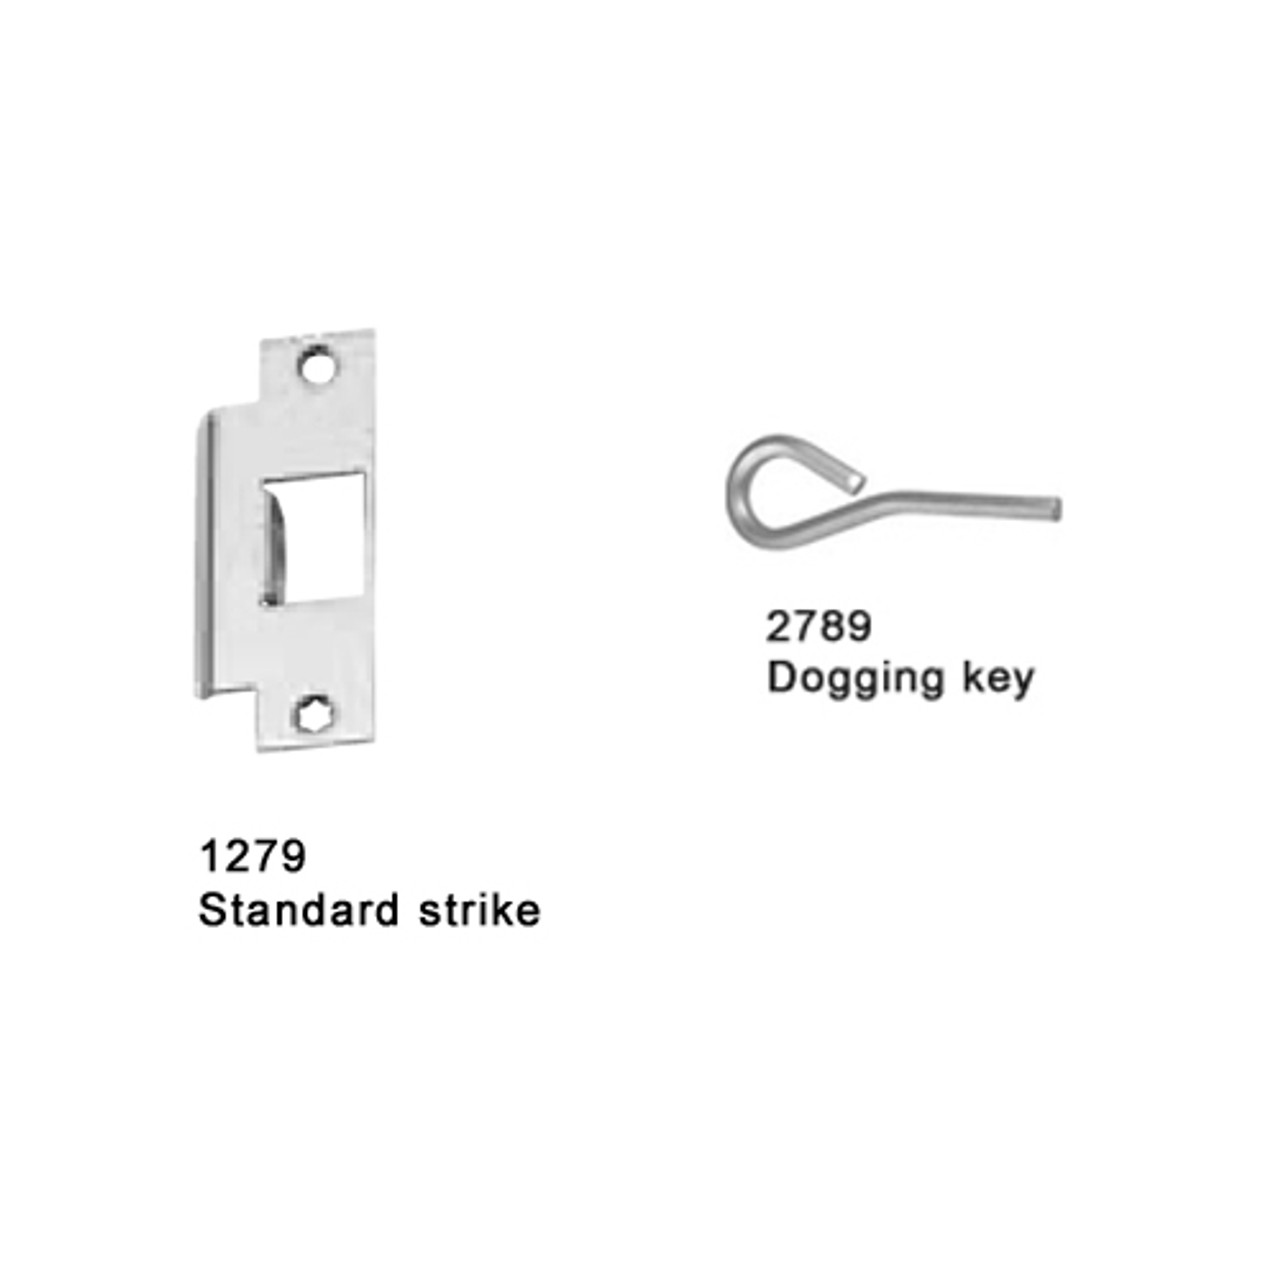 25-M-L-DANE-US26-3-RHR Falcon 25 Series Mortise Lock Devices with 510L Dane Lever Trim in Polished Chrome